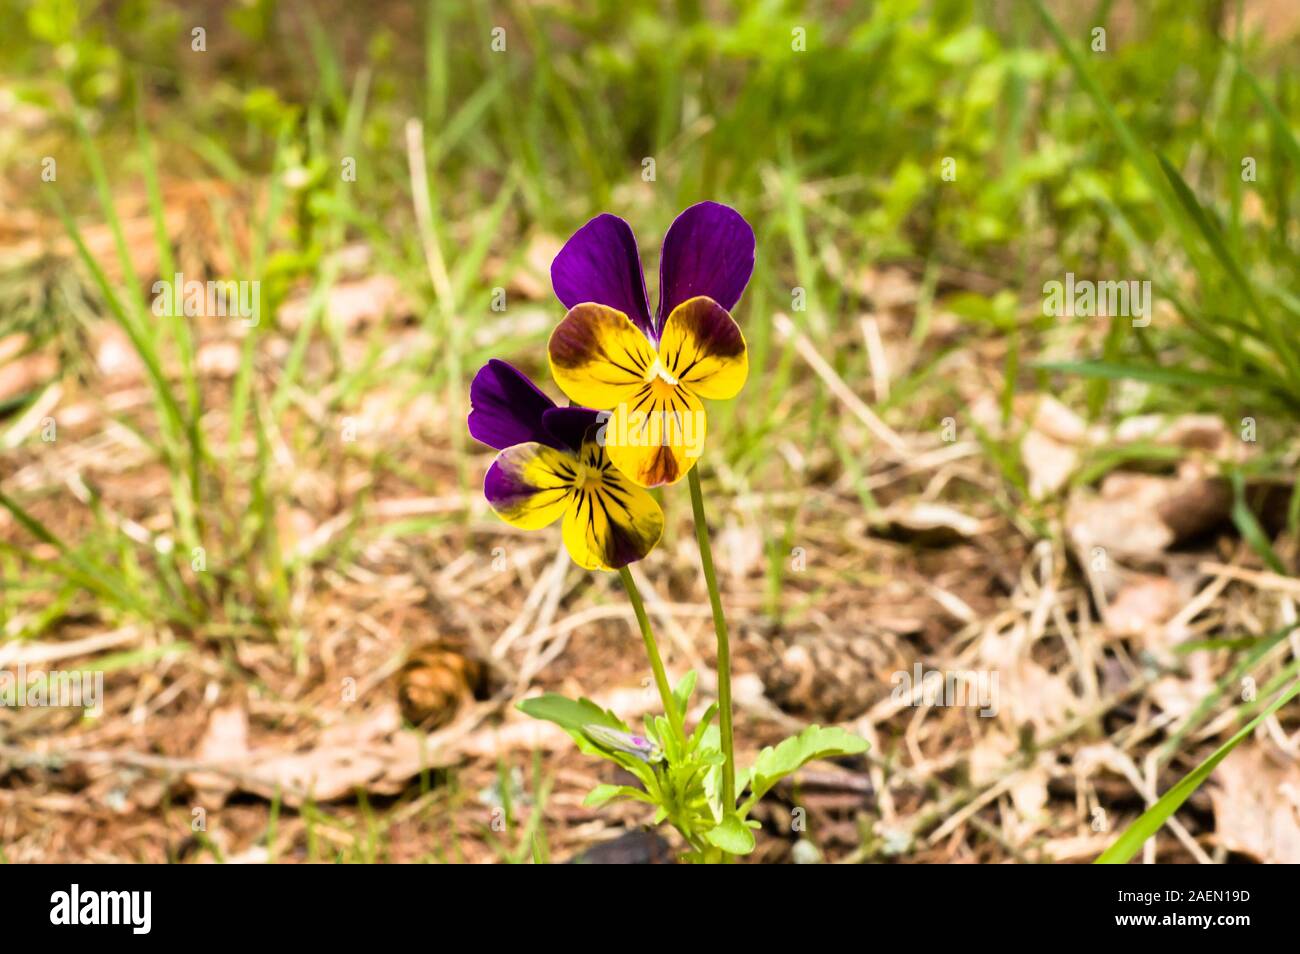 Spring background with pansy flower, violet, purple viola tricolor Stock Photo